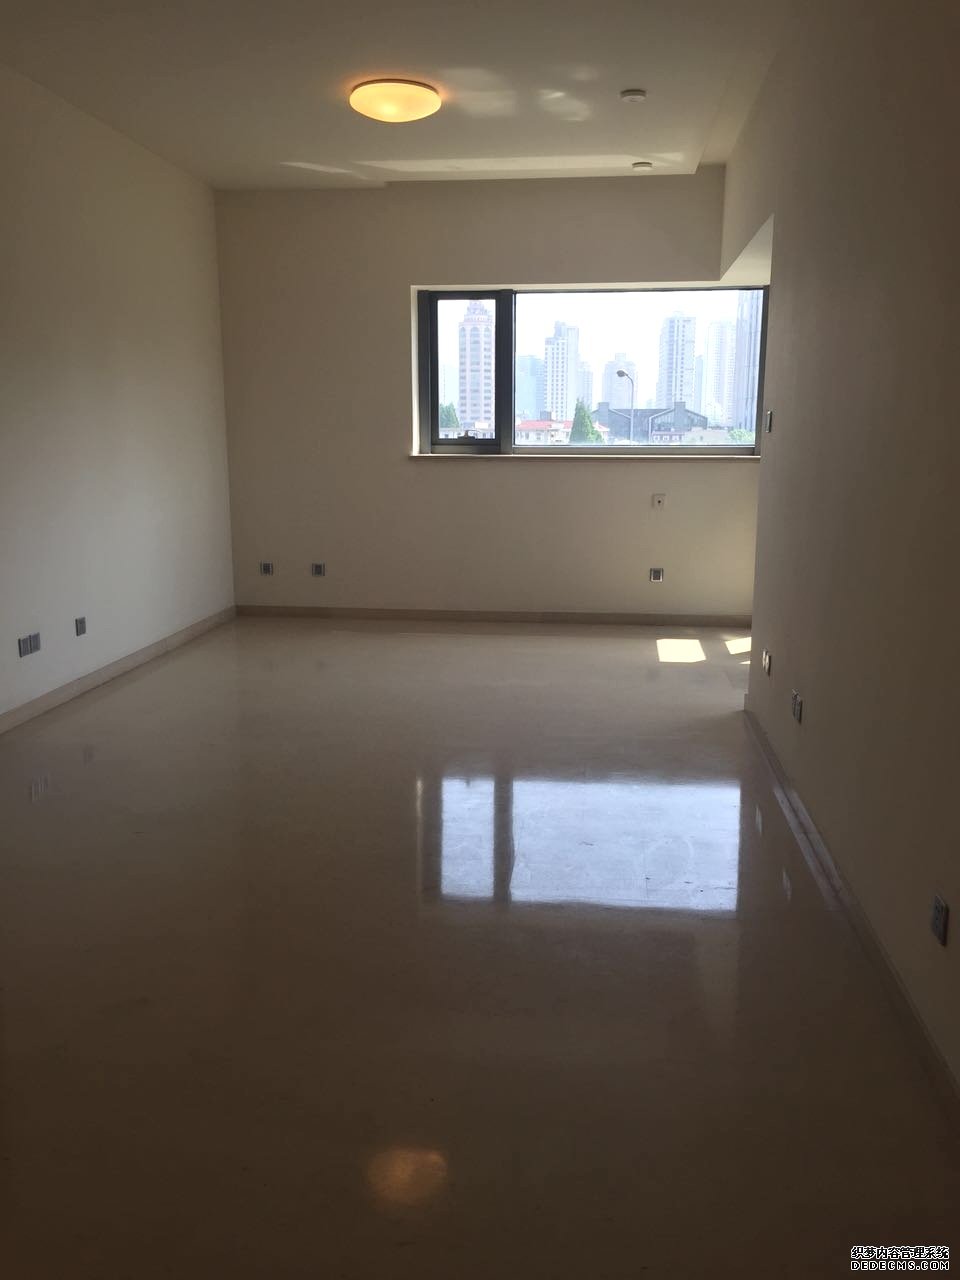  Unfurnished 3BR Apartment in Sinan Mansions